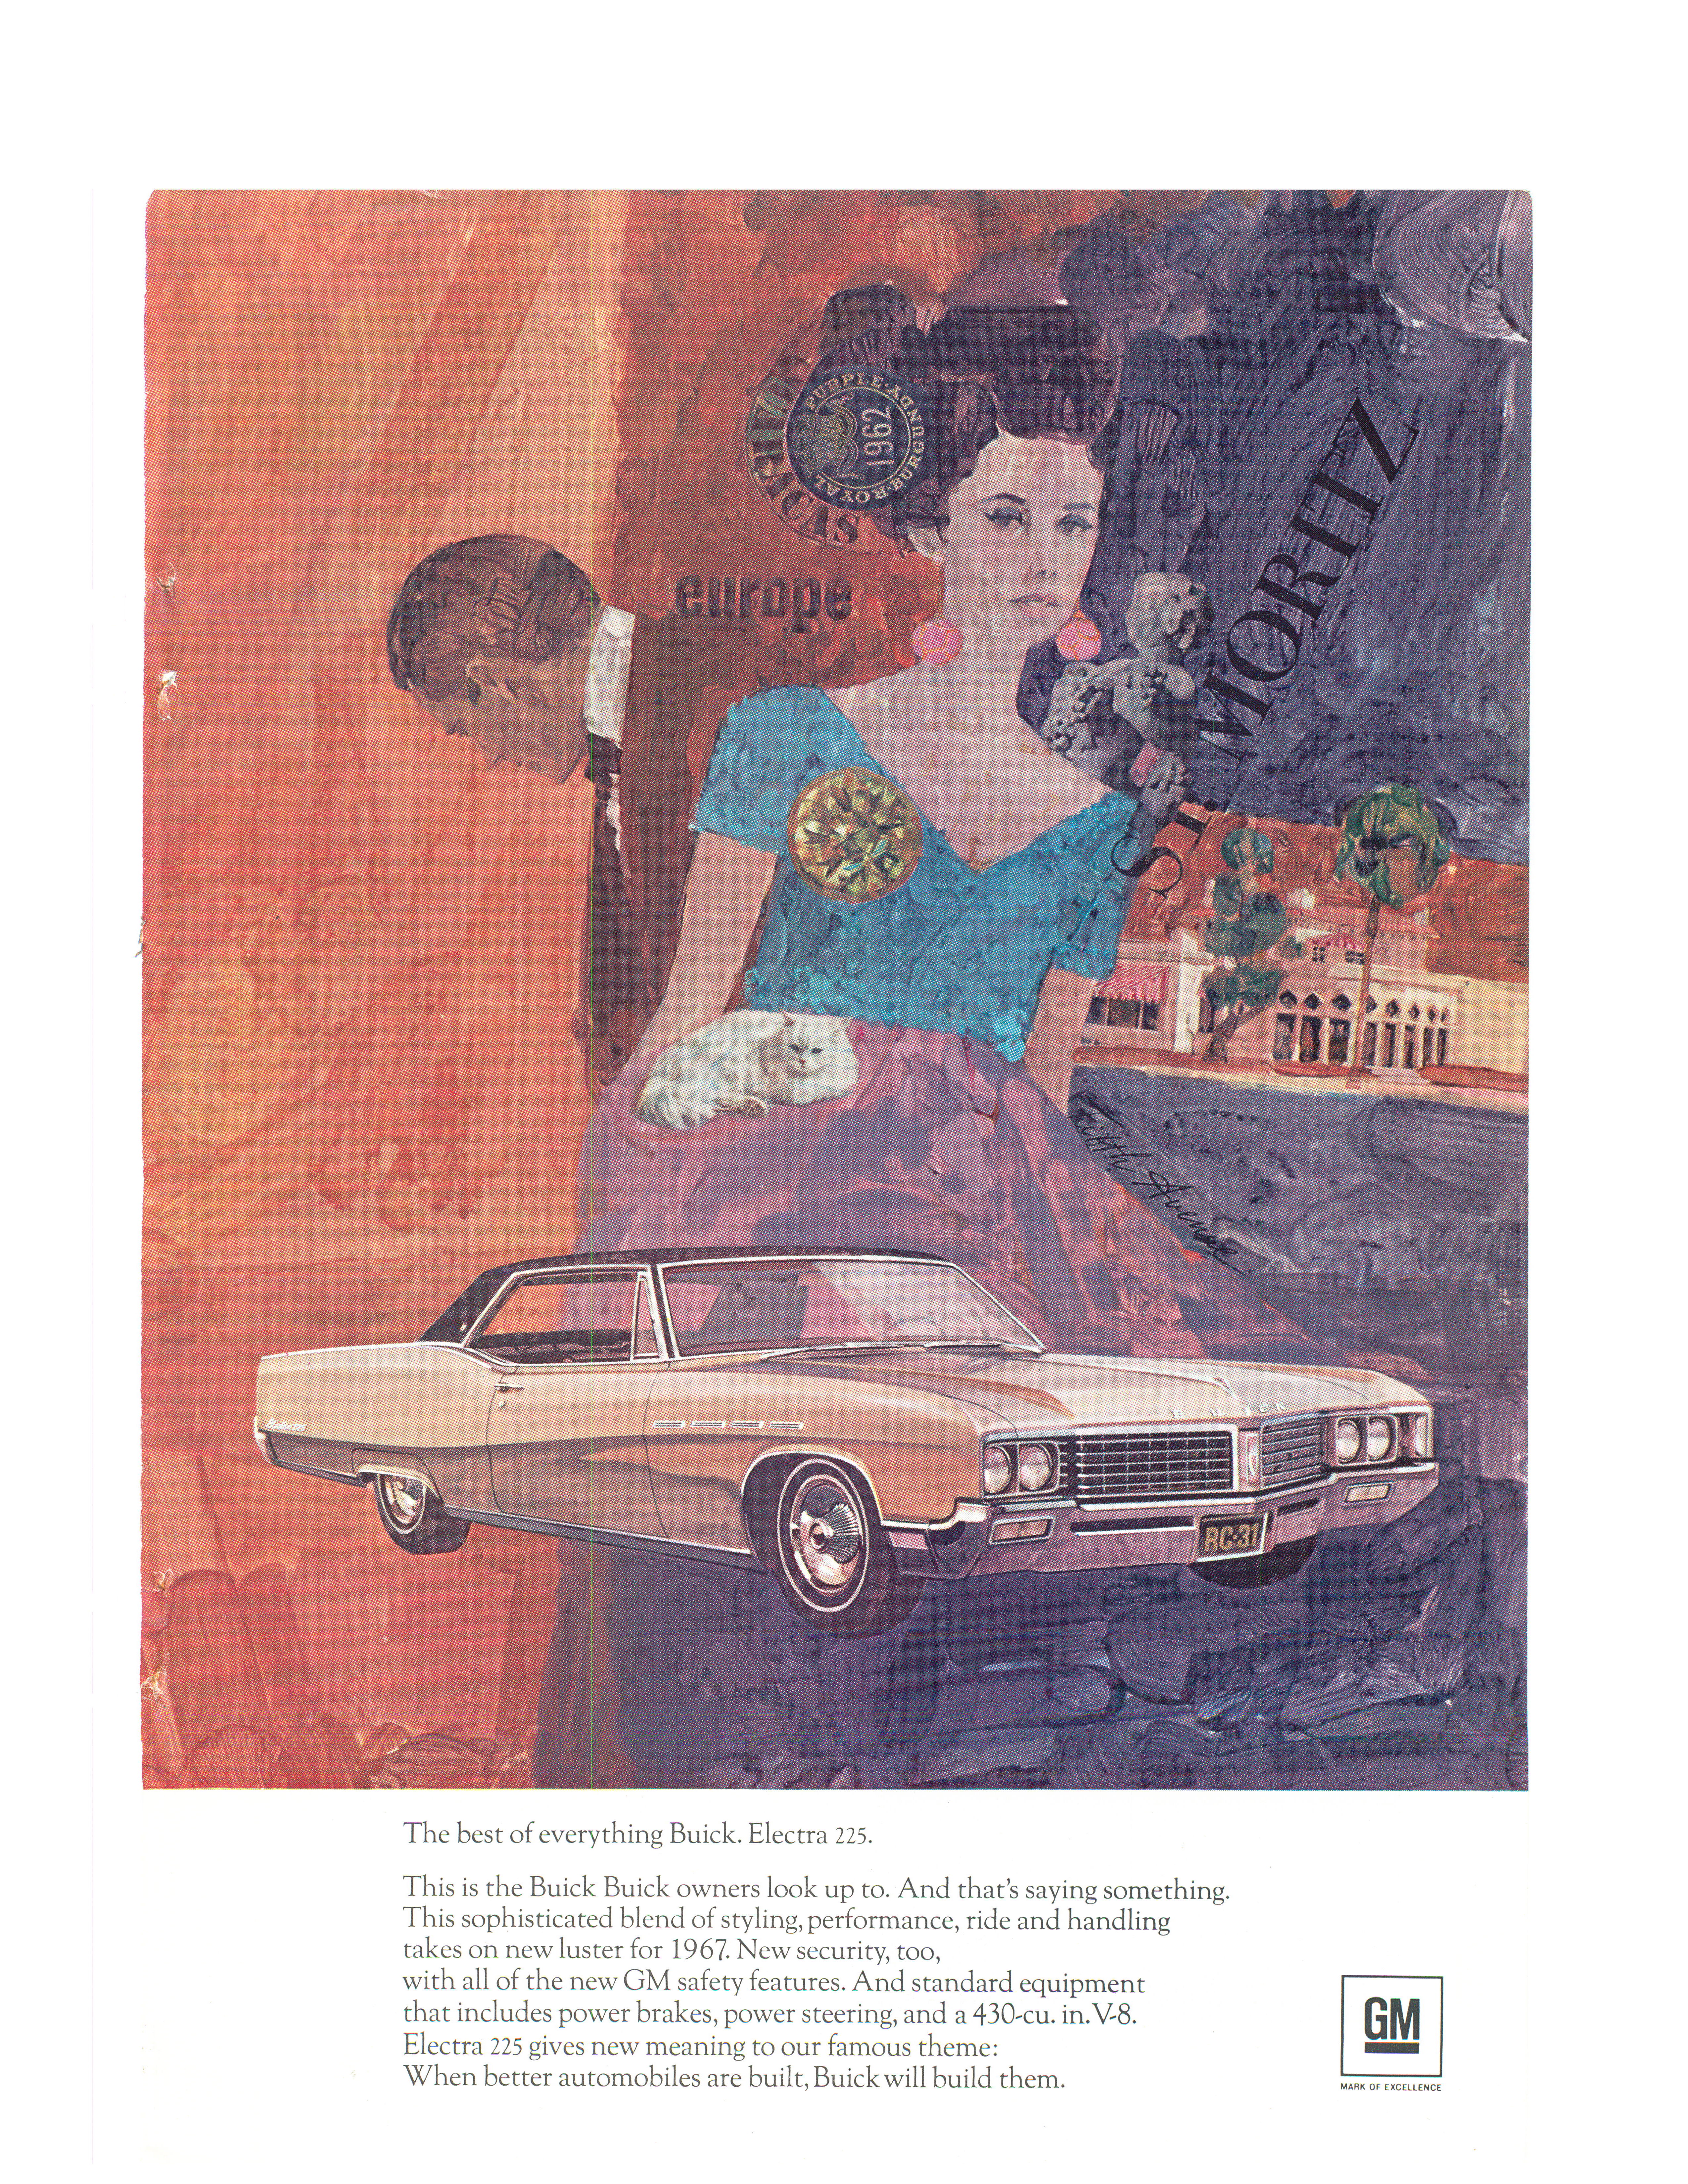 1965 National Geographic - 1967 Buick Electra 225 Ad